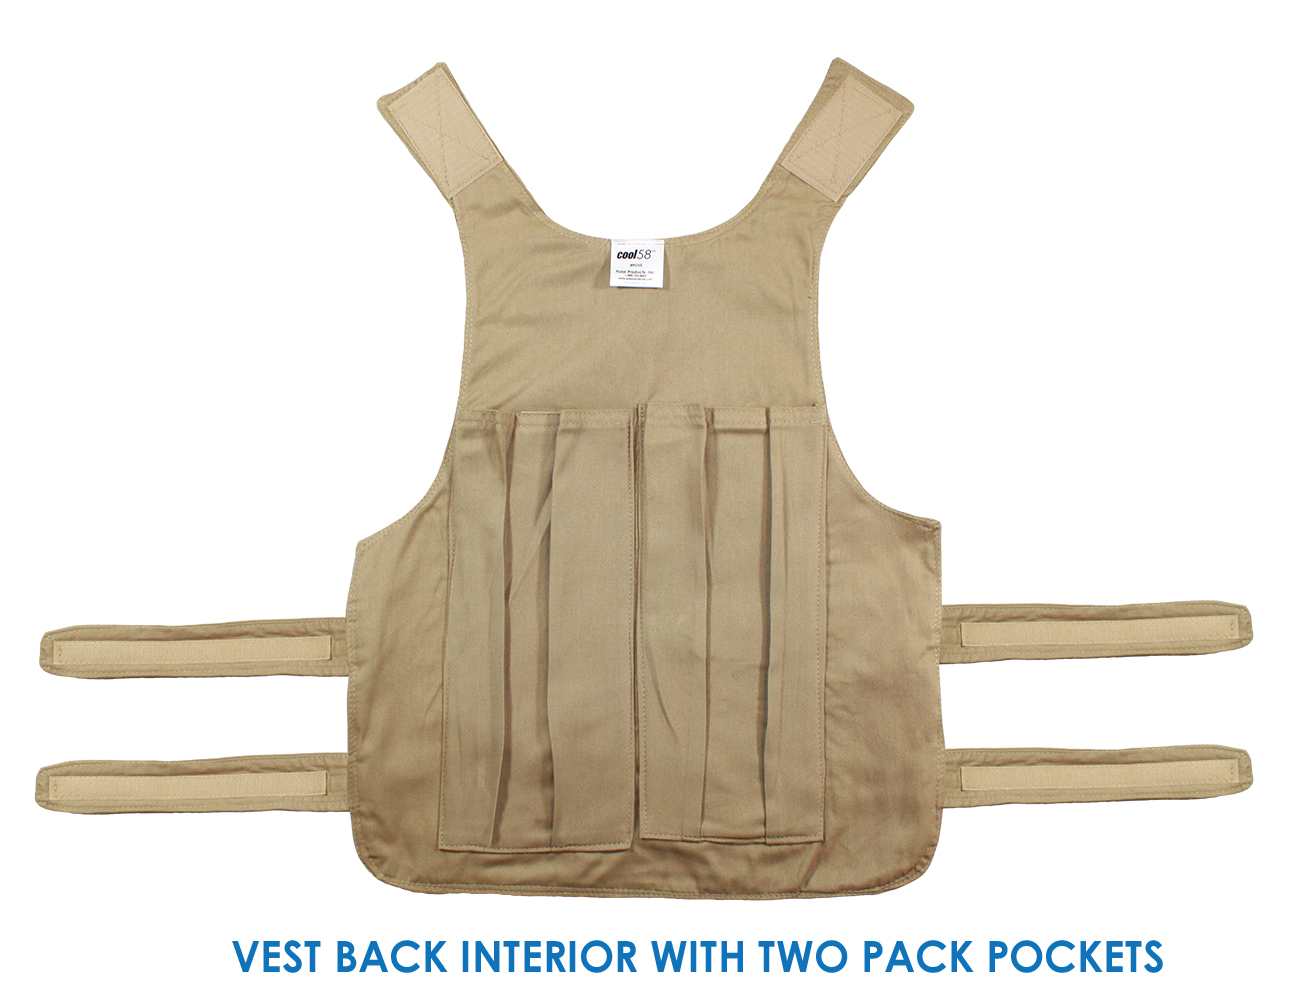 Back interior of a Cool58 adjustable phase change vest with two pack pockets